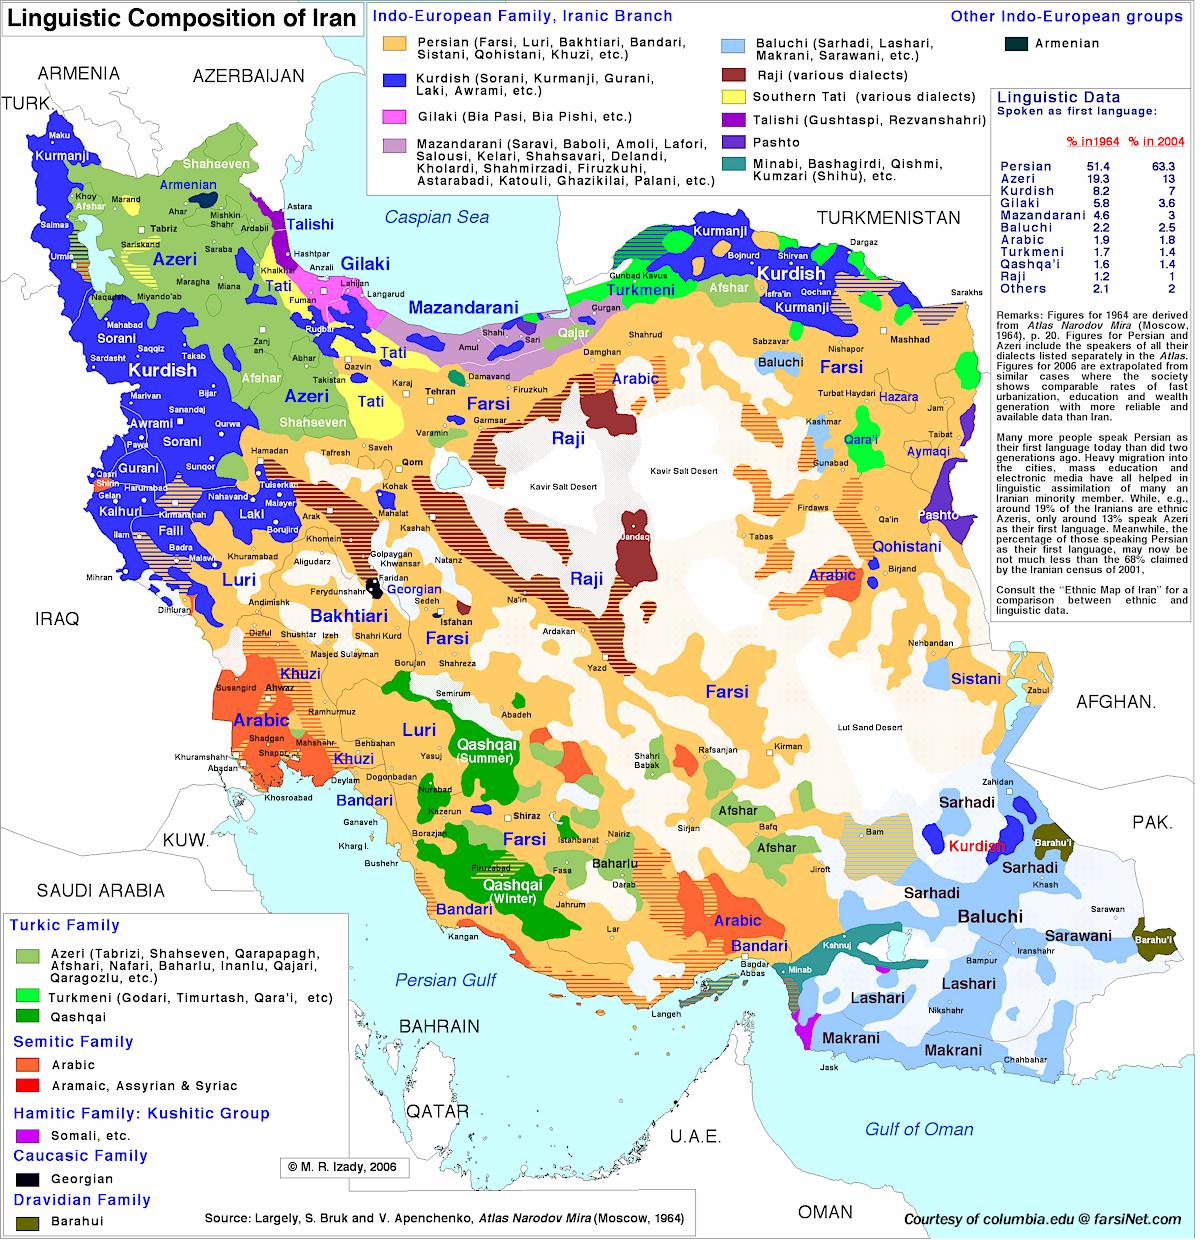 Detailed Color Coded Linguistic Composition Map of Iran showing the area where each Persian (farsi ) Dialec is spoken as well as all other languages spoken in Iran